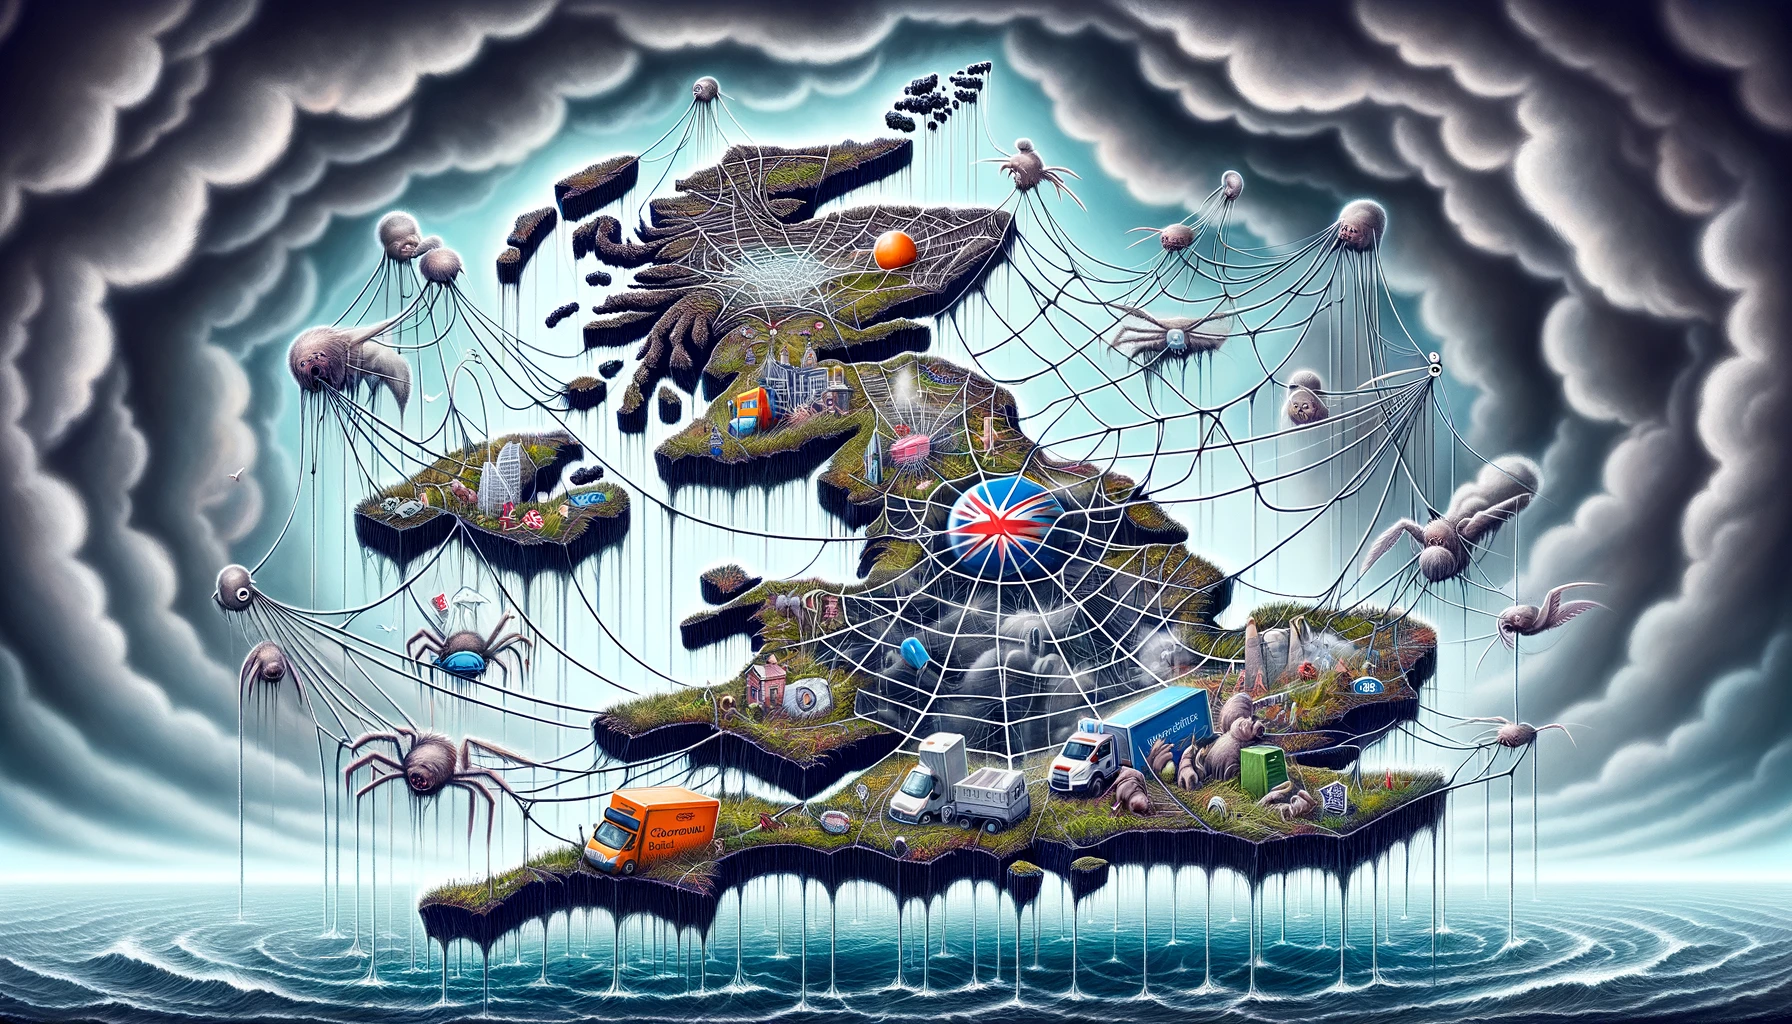 A surreal illustration depicting the UK shaped as a tangled web, representing the failing council services with frayed and broken strands, set against stormy clouds.